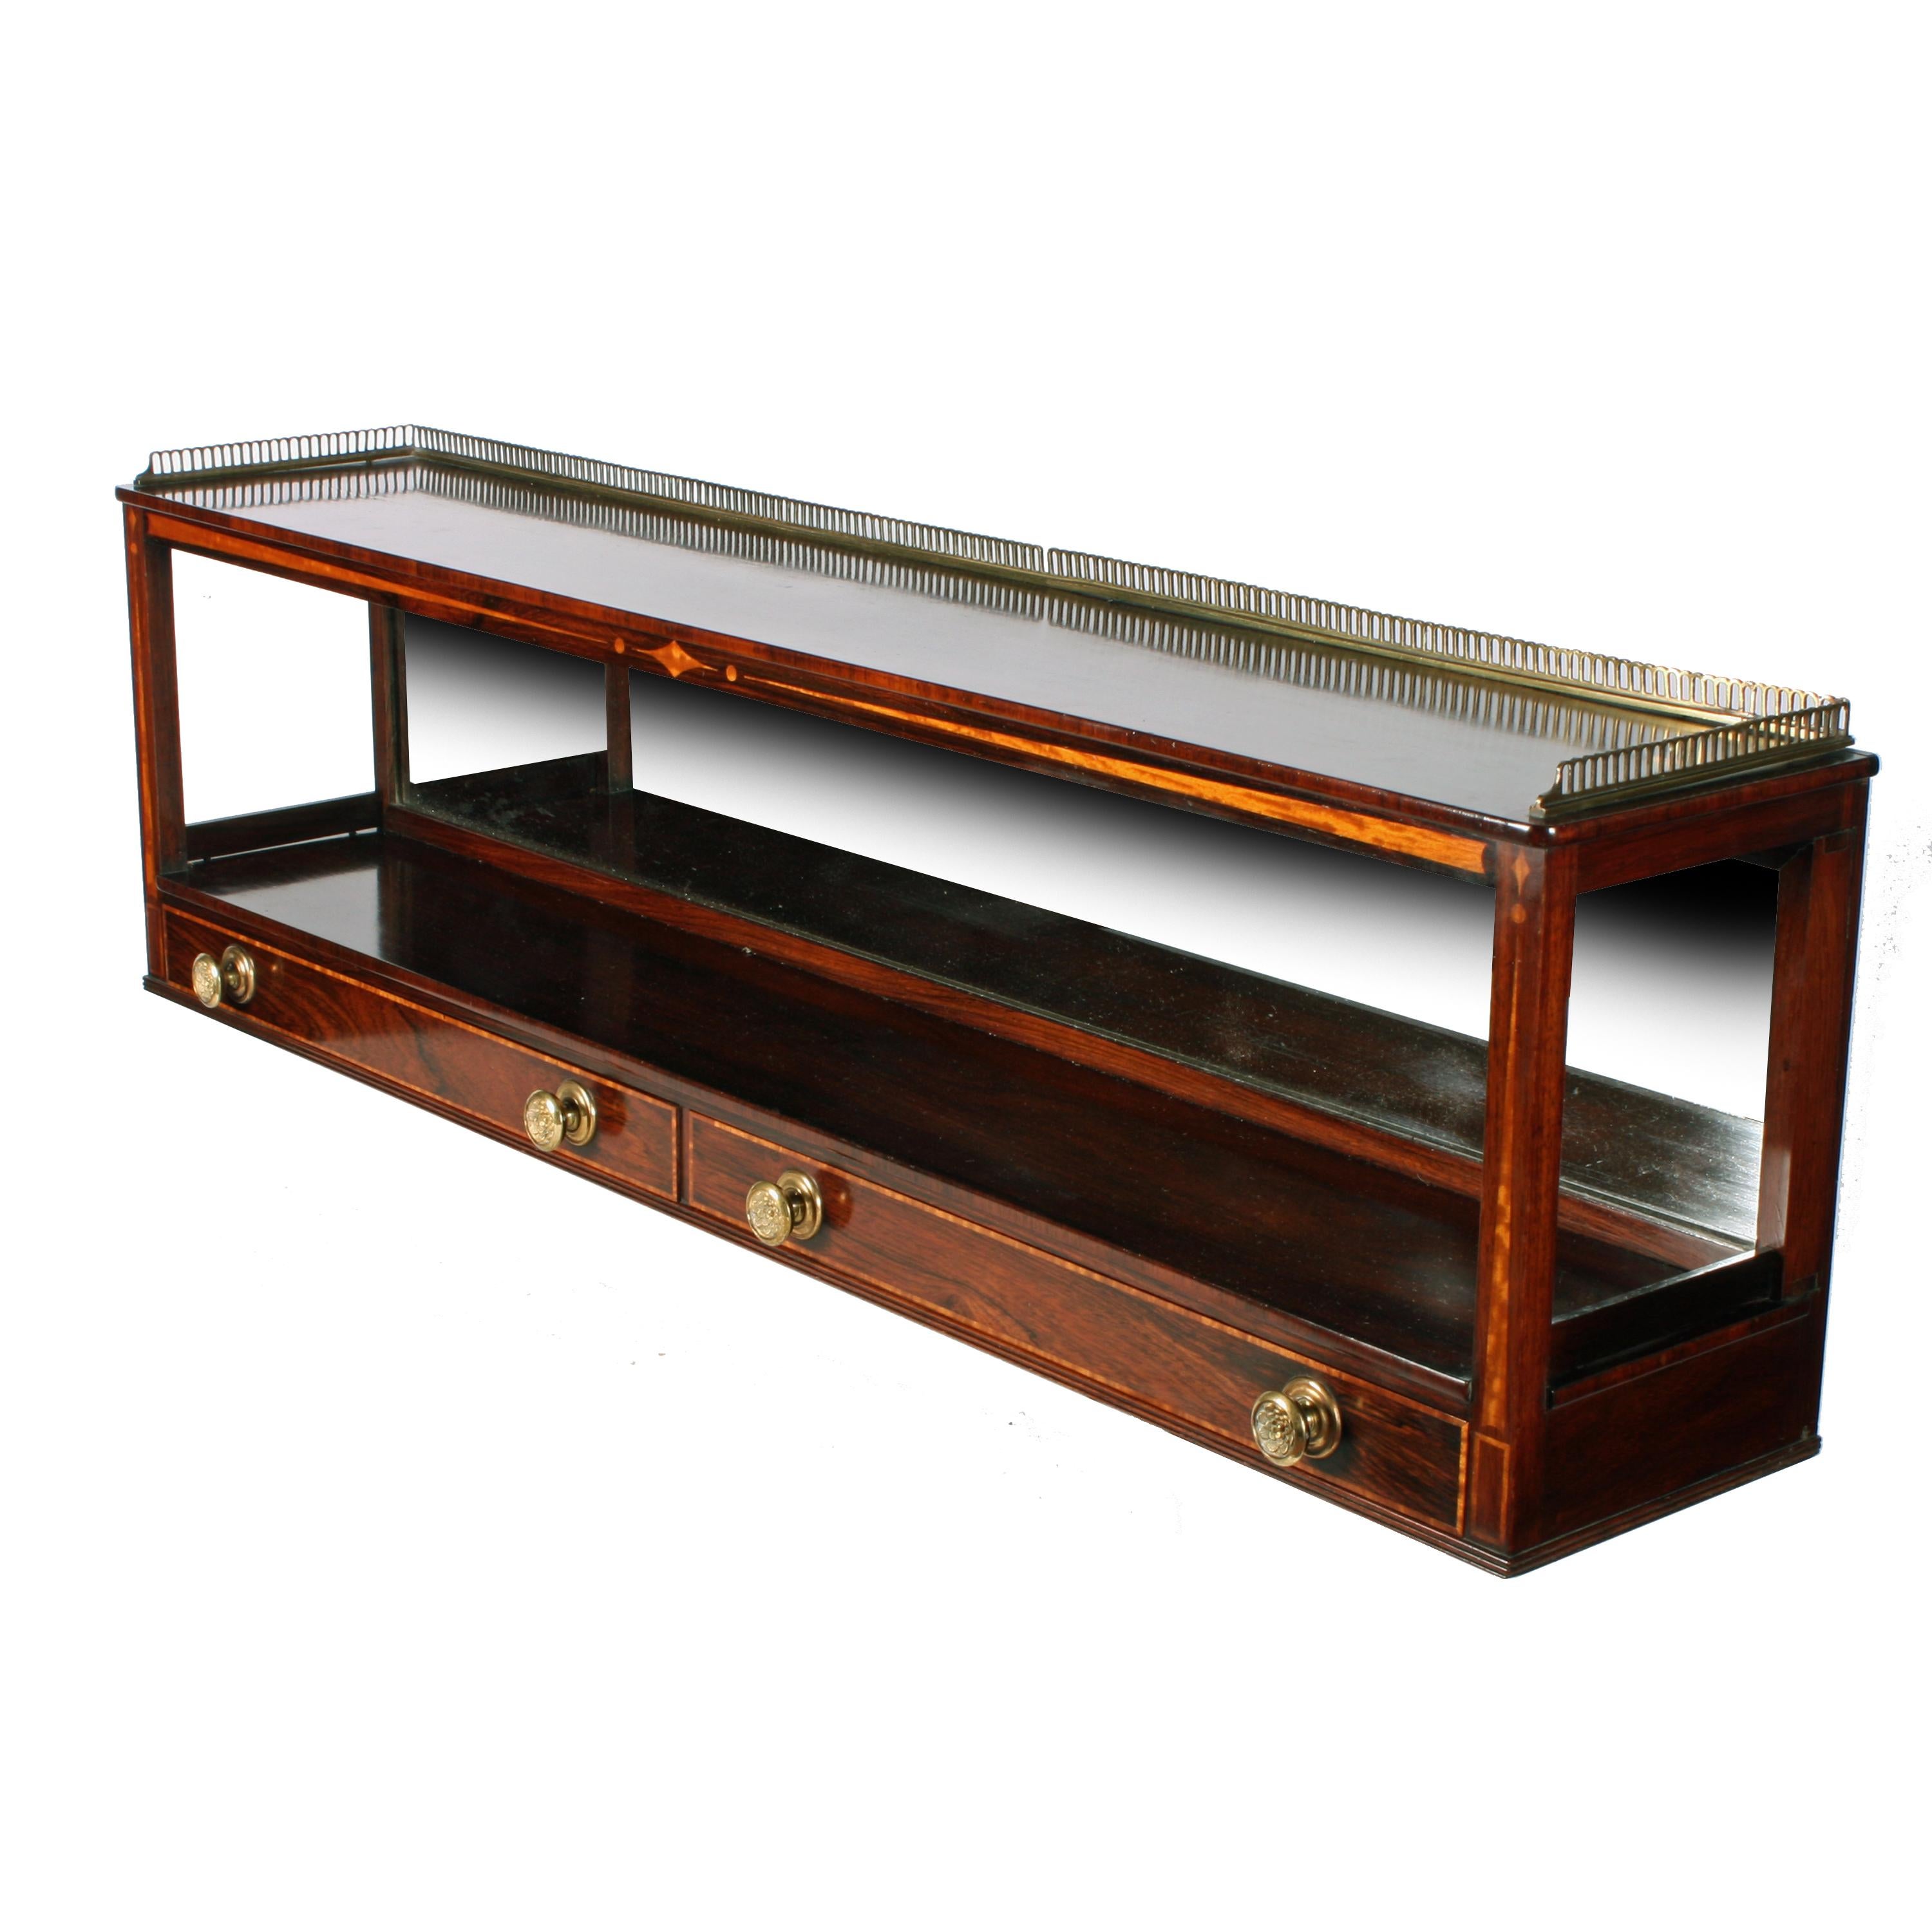 Regency rosewood wall shelf


A fine quality early 19th century Regency rosewood mirror backed wall shelf.

This is an exceptionally made shelf with quality rosewood, rosewood veneers and panels of satinwood inlaid into the square front pillars